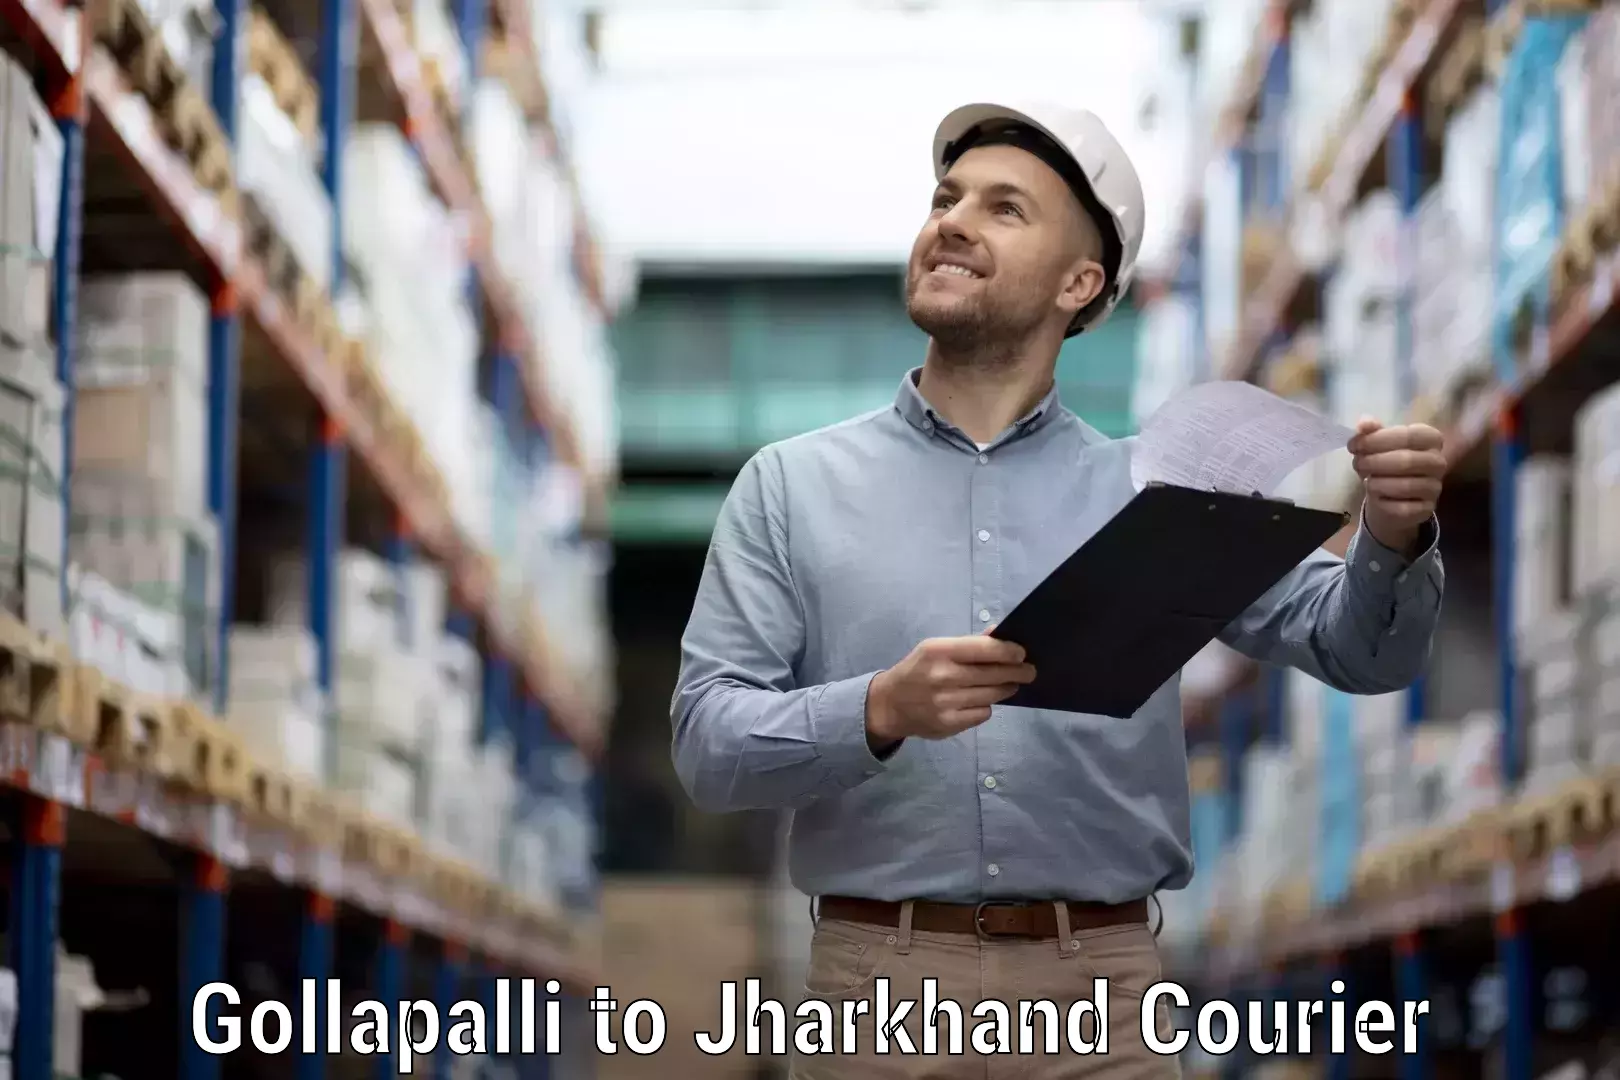 Courier service booking Gollapalli to Ranchi